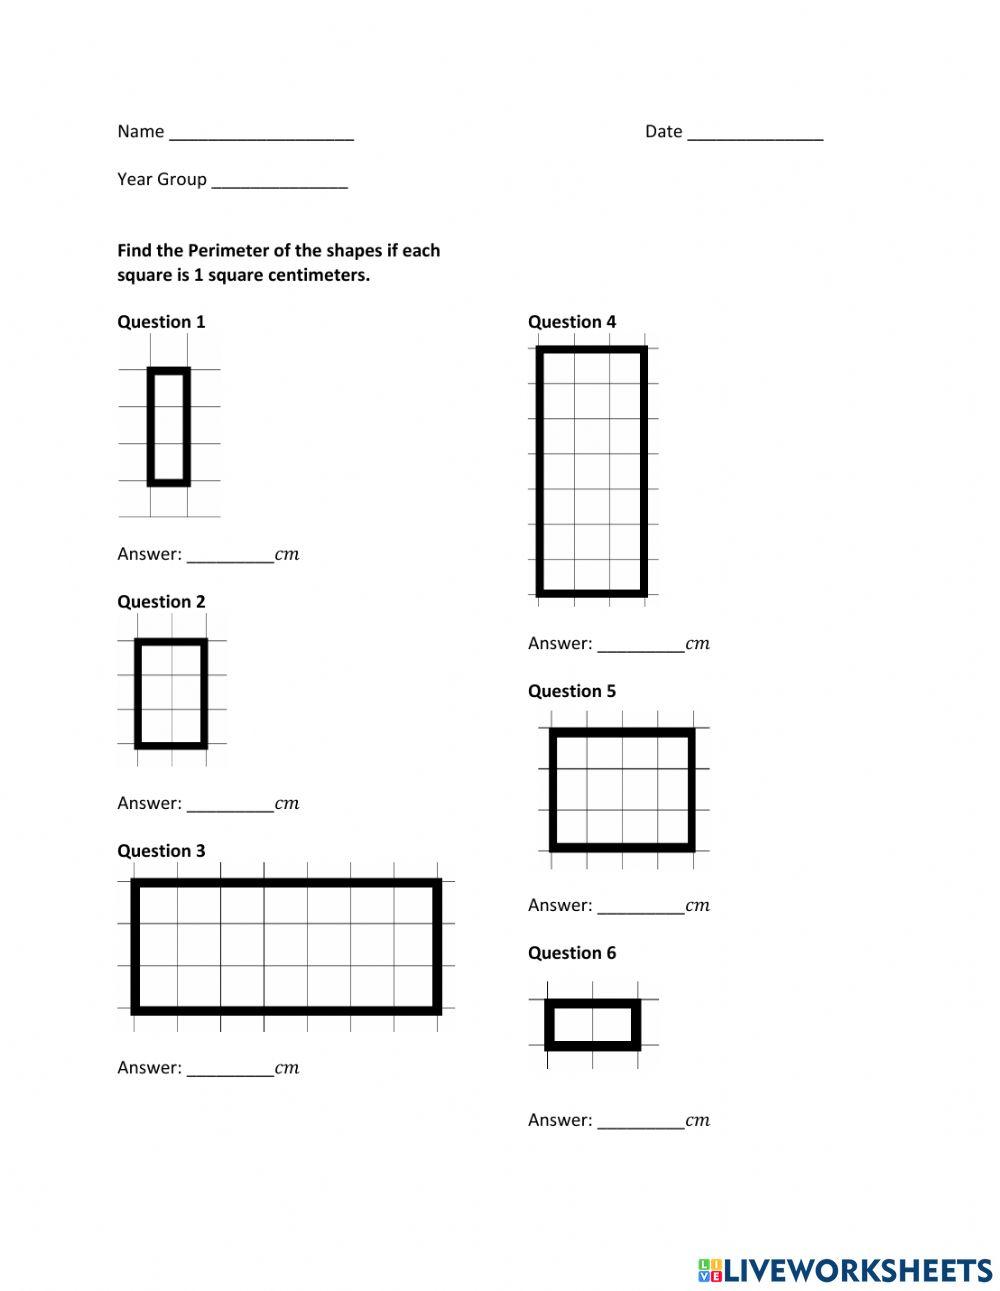 Perimeter - Counting the Sides with Grids